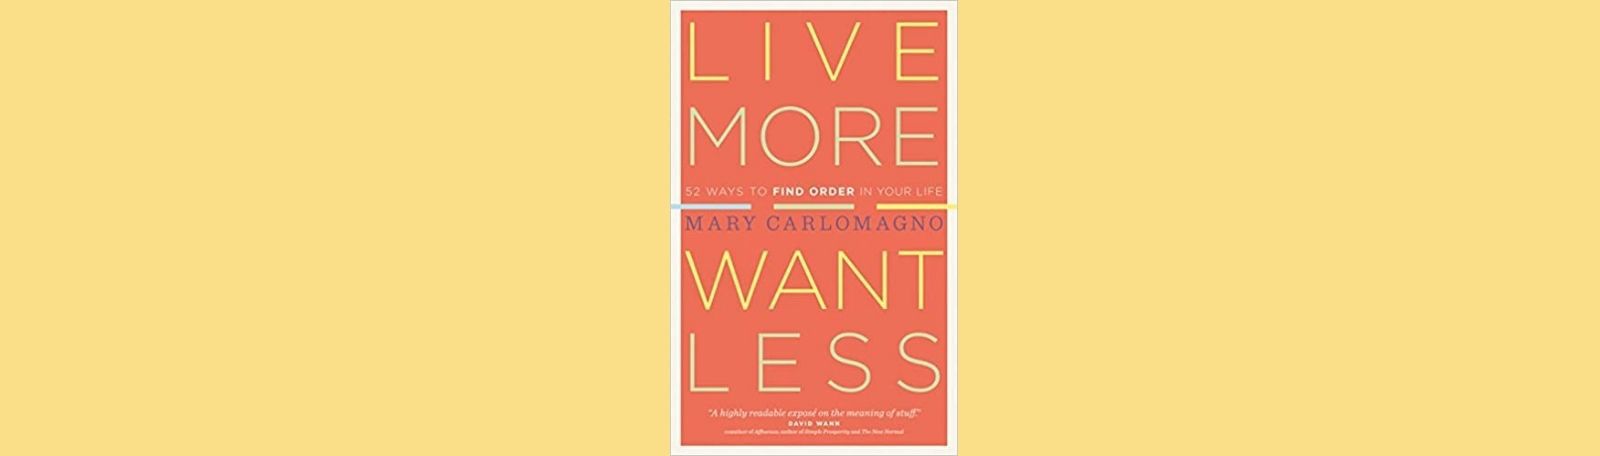 Featured image for “Live More Want Less”